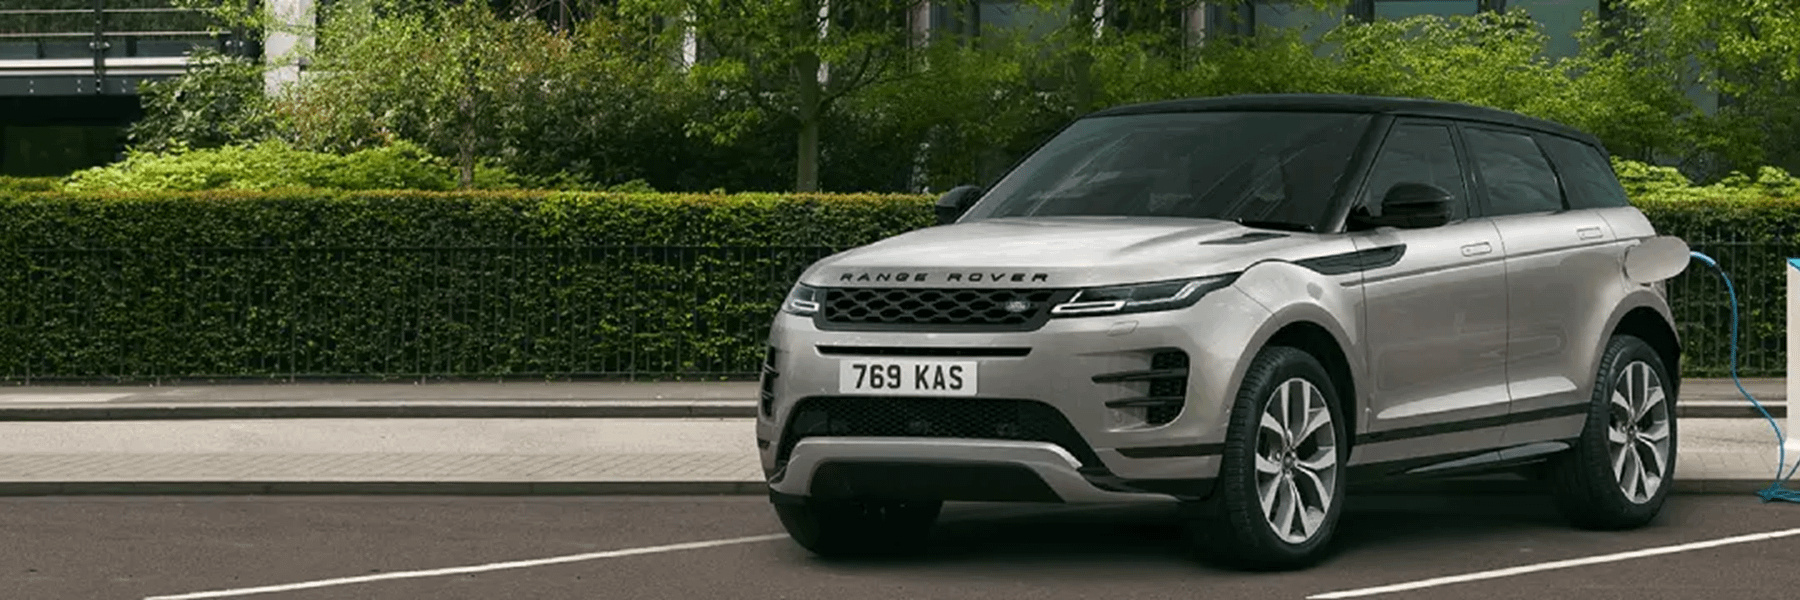 Which Range Rover Model is Best?